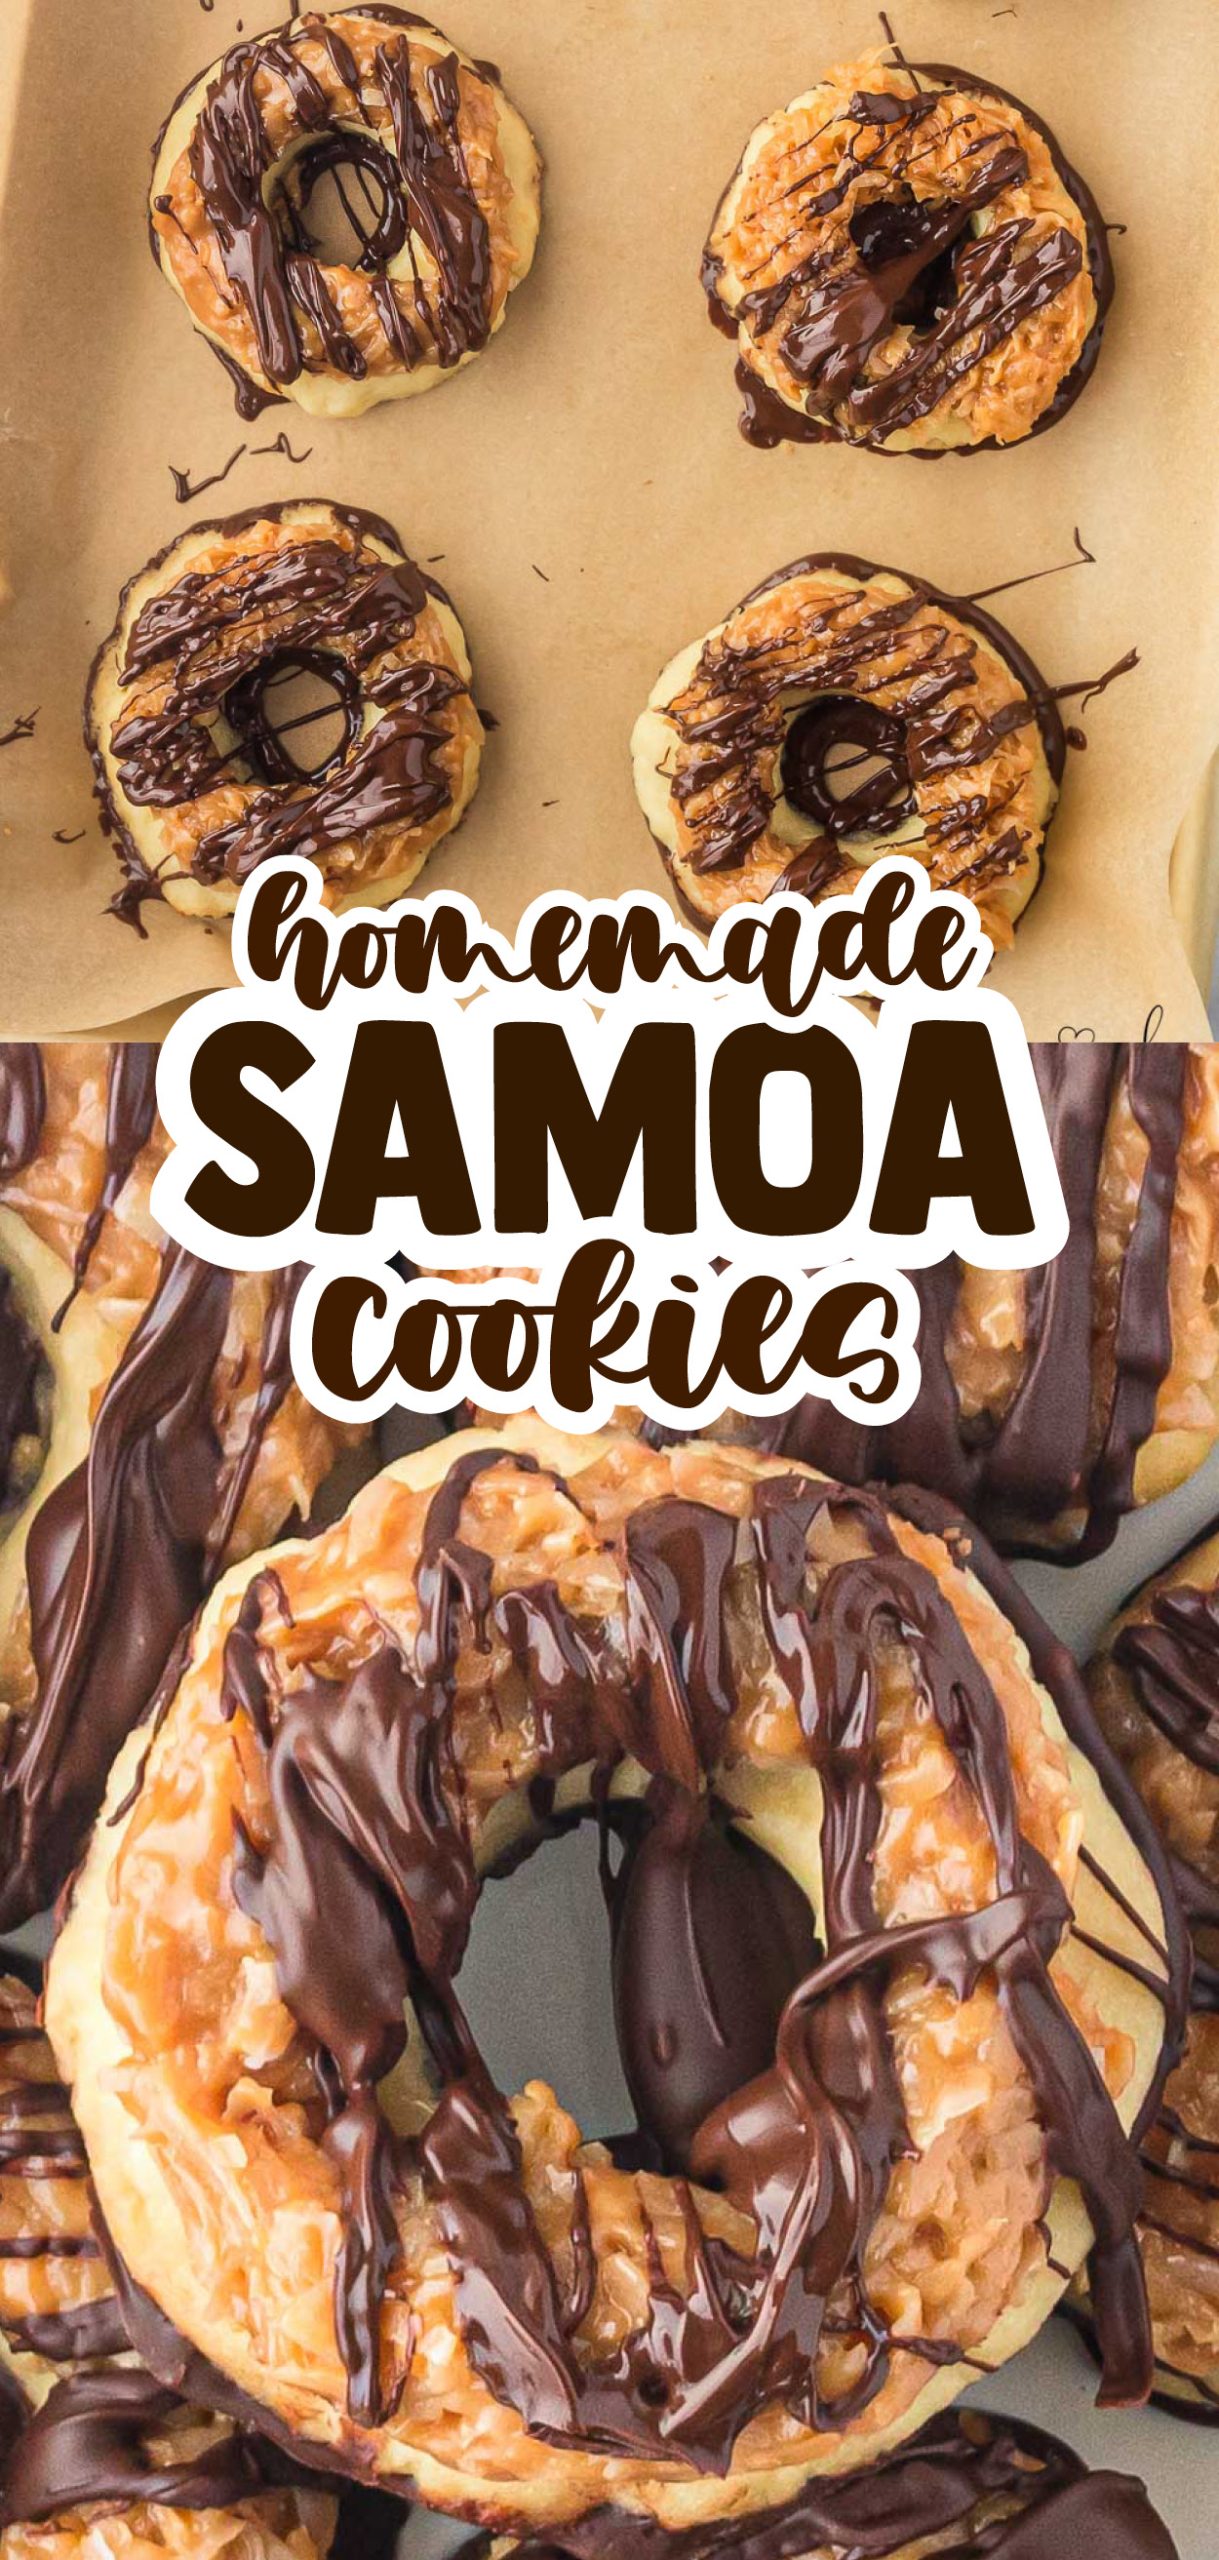 Homemade Samoa Cookies are a copycat version of the Girl Scout Cookie! Big, thick, and packed with chocolate, caramel, and coconut.